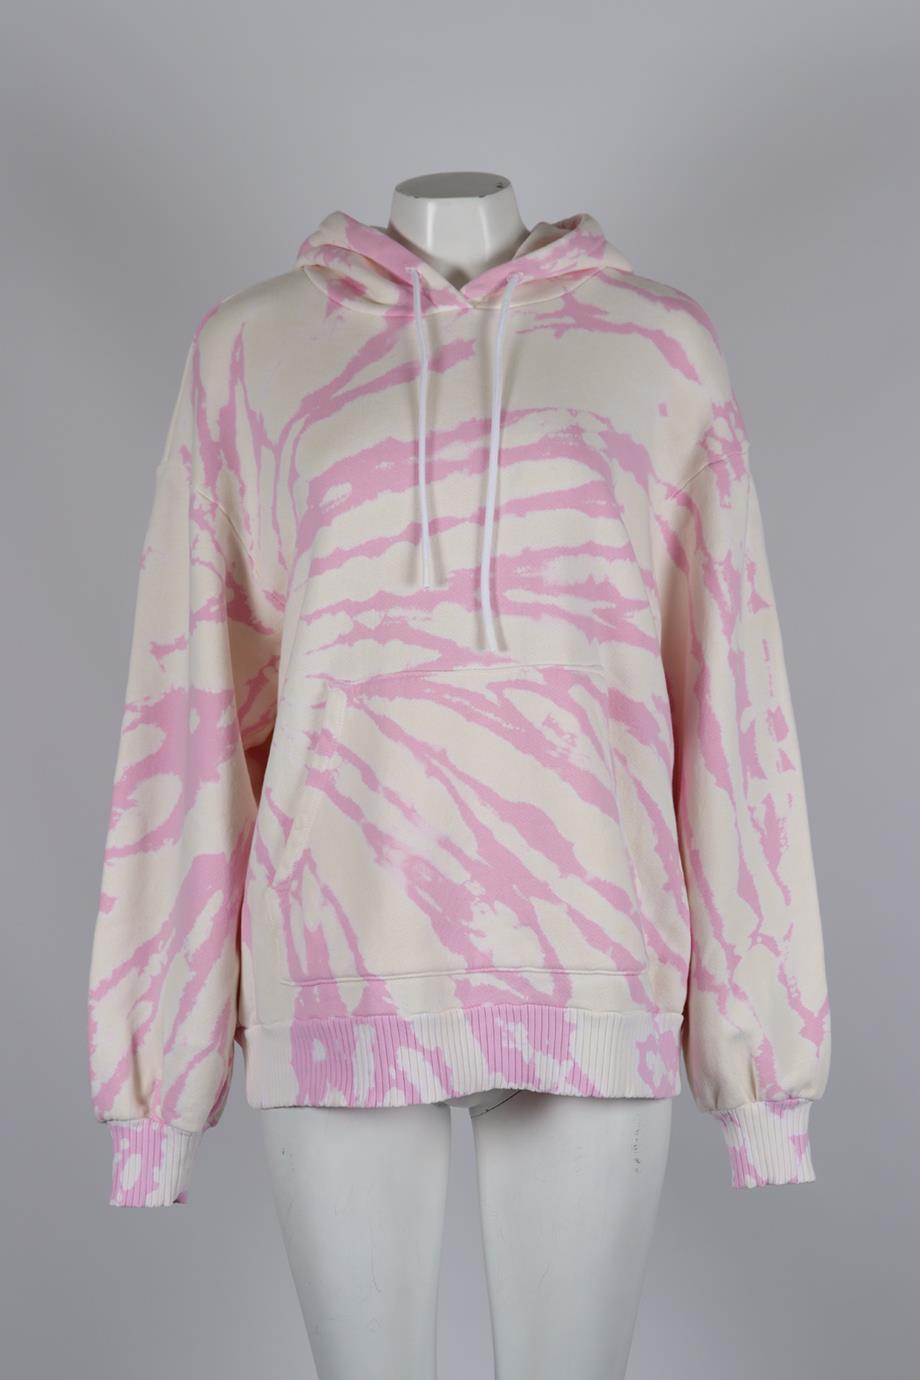 COTTON CITIZEN OVERSIZED TIE DYED COTTON JERSEY HOODIE LARGE